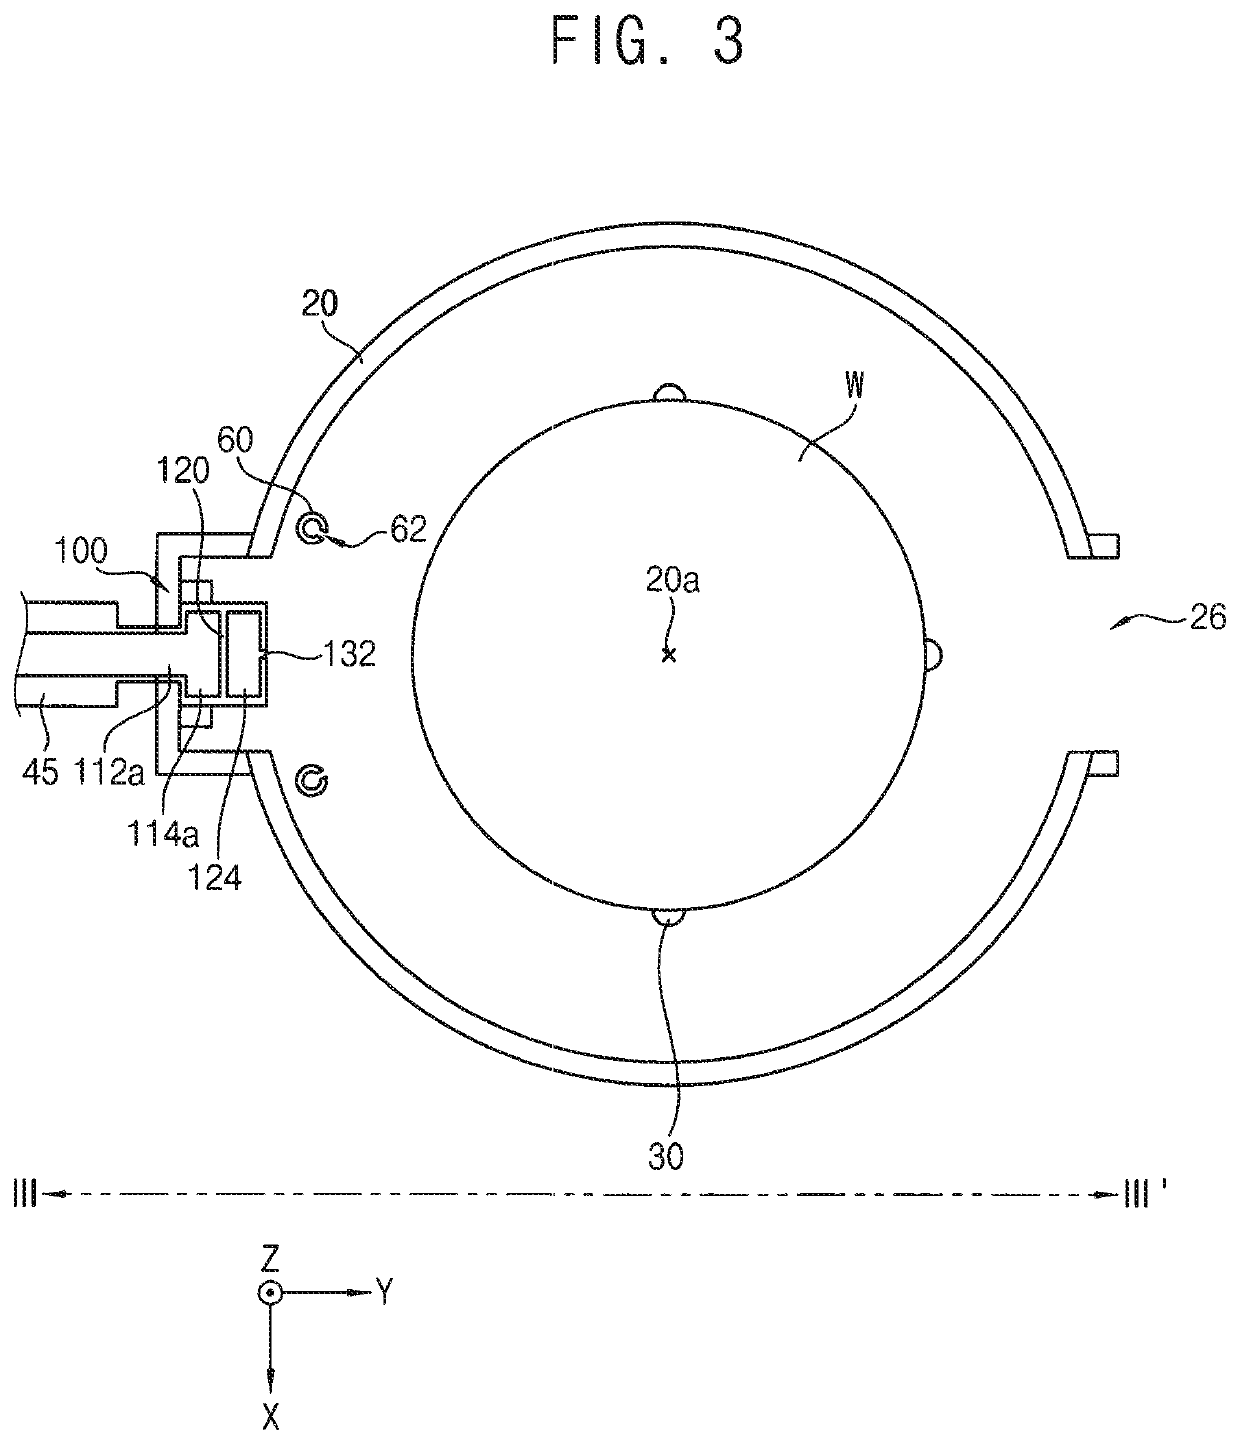 Gas injectors and wafer processing apparatuses having the same